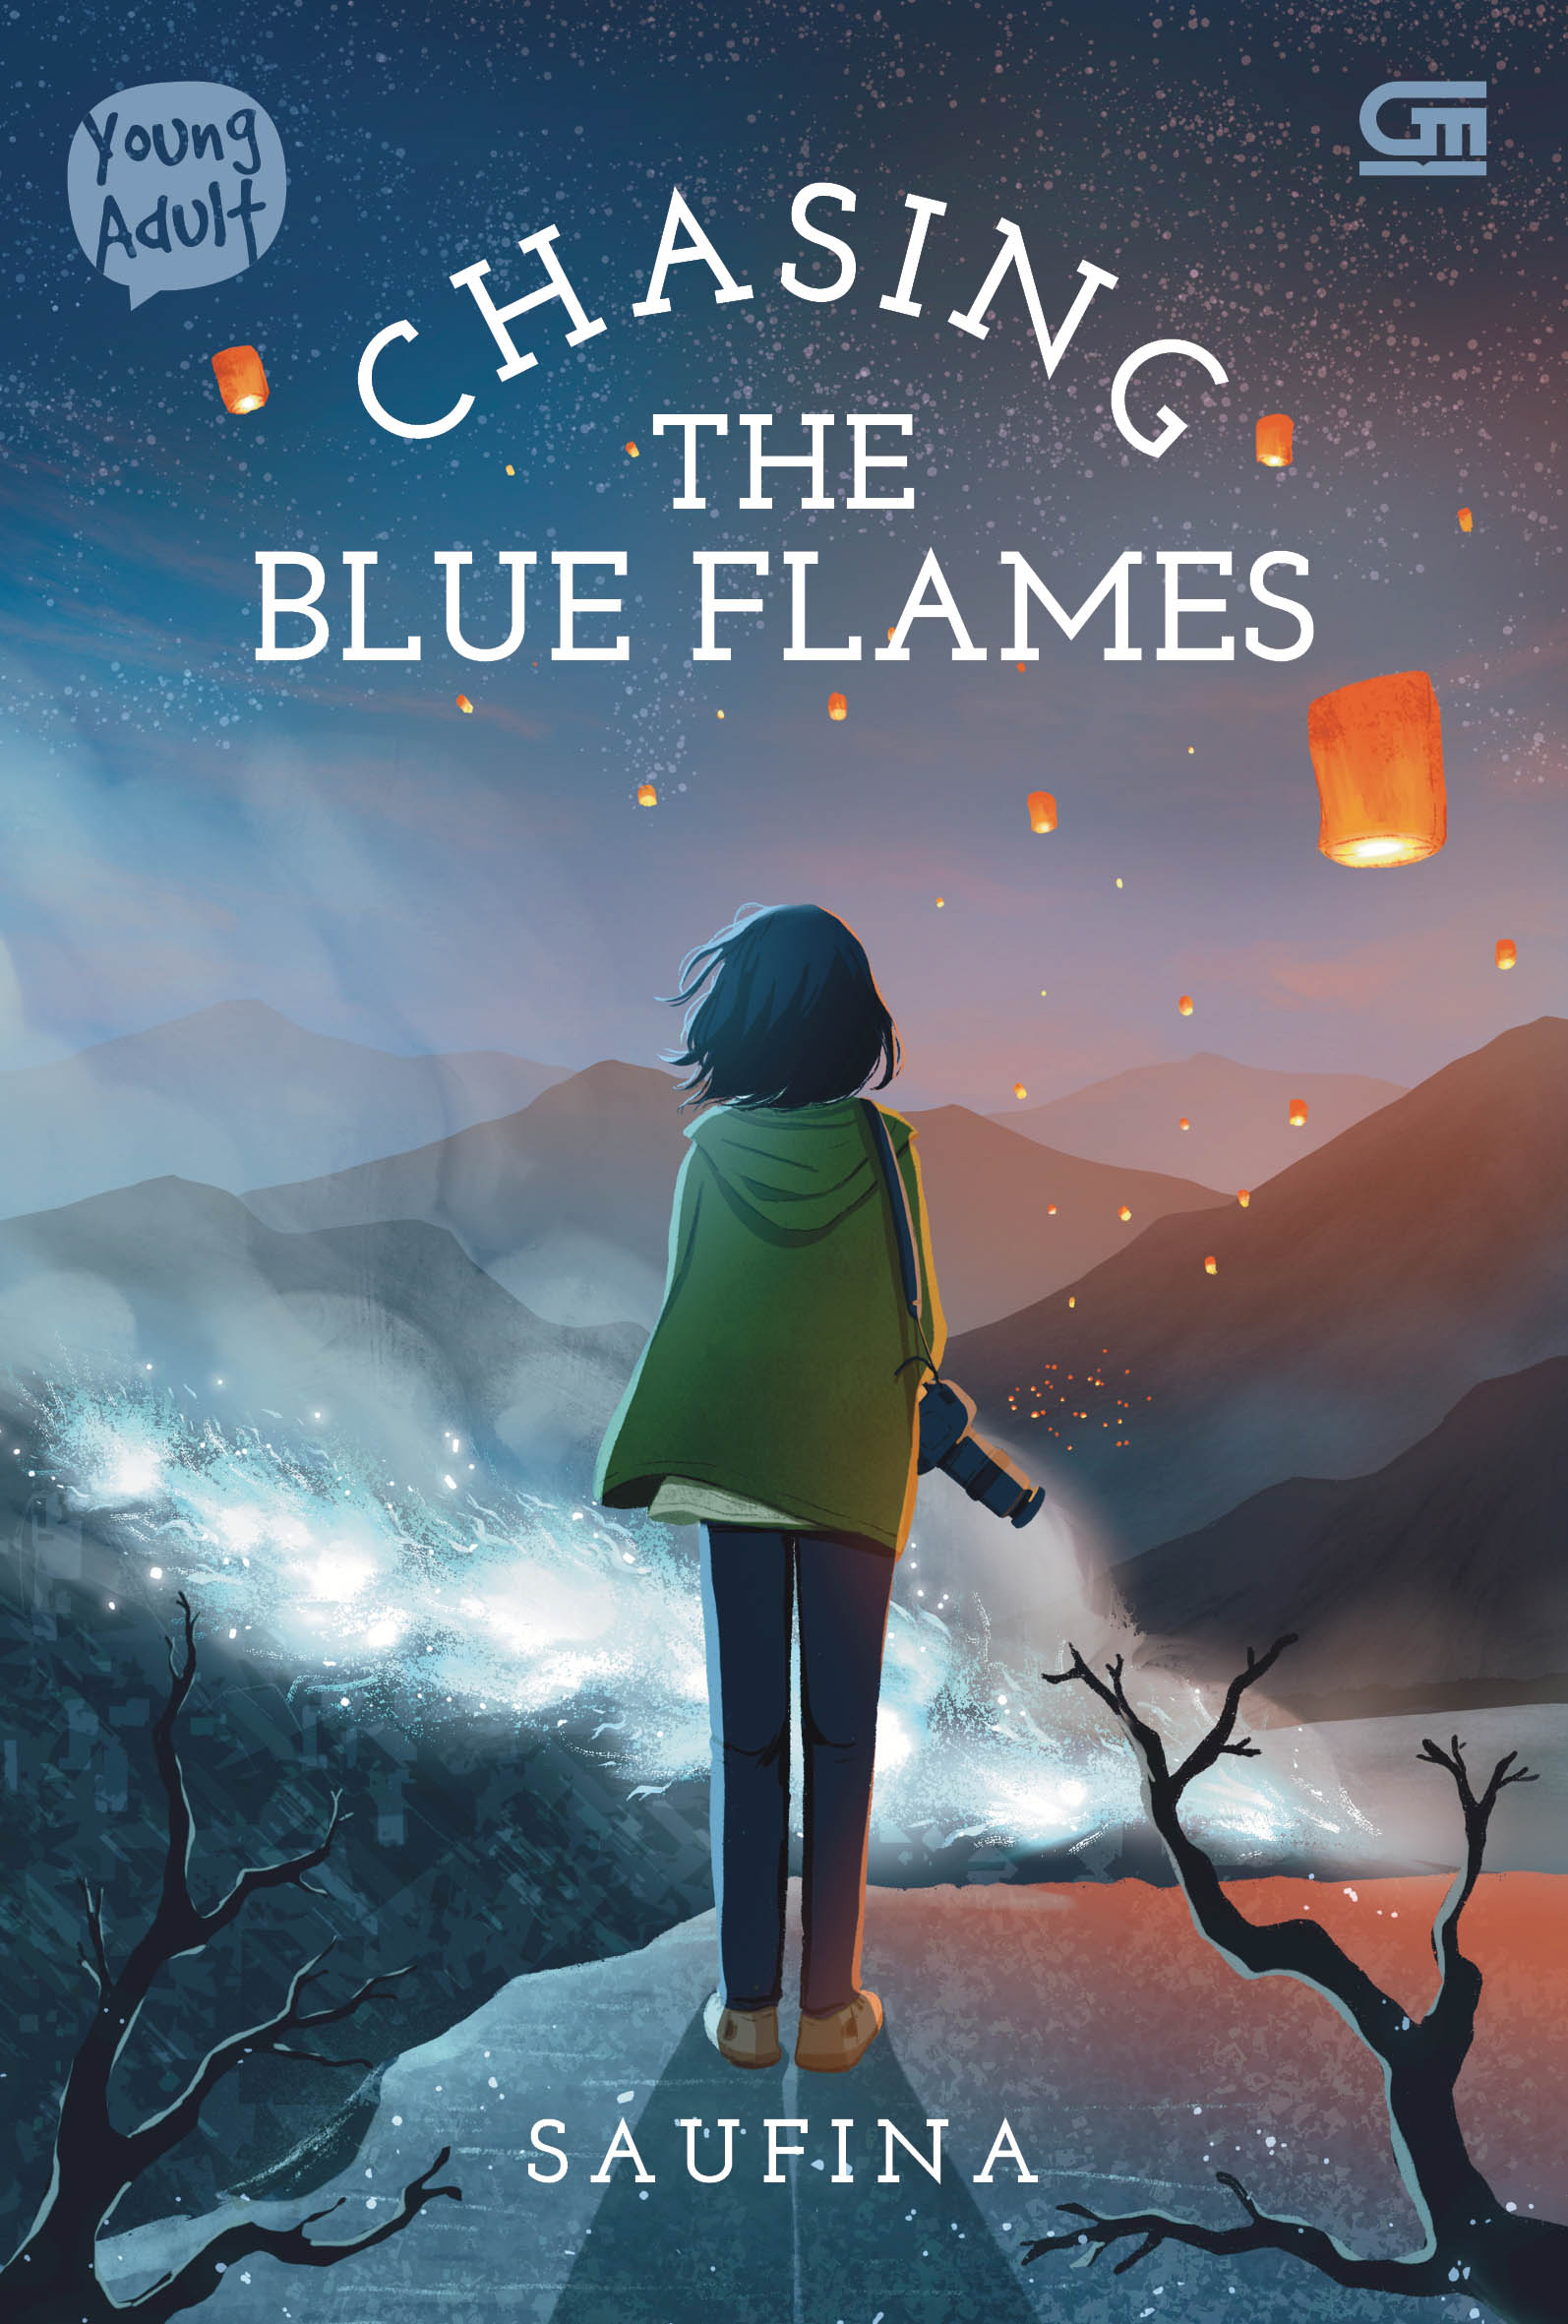 Young Adult: Chasing the Blue Flames